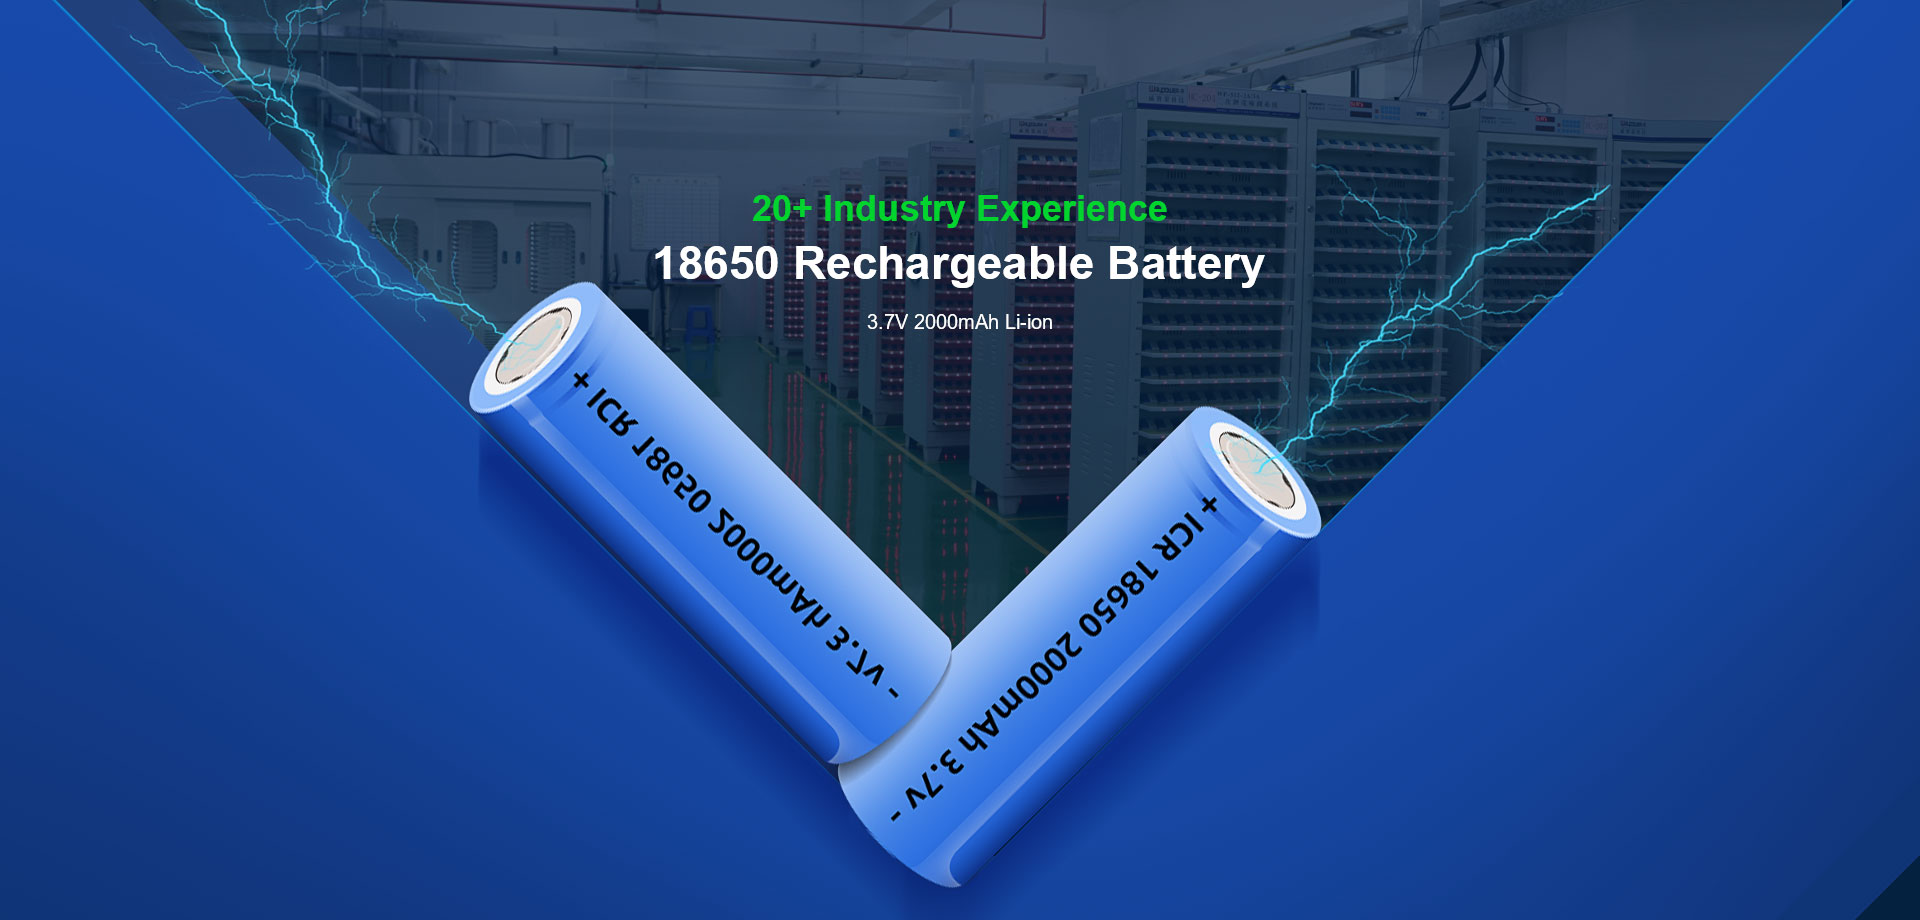 18650 ncr 2200mah high rate lithium ion battery cell 18650 battery rechargeable